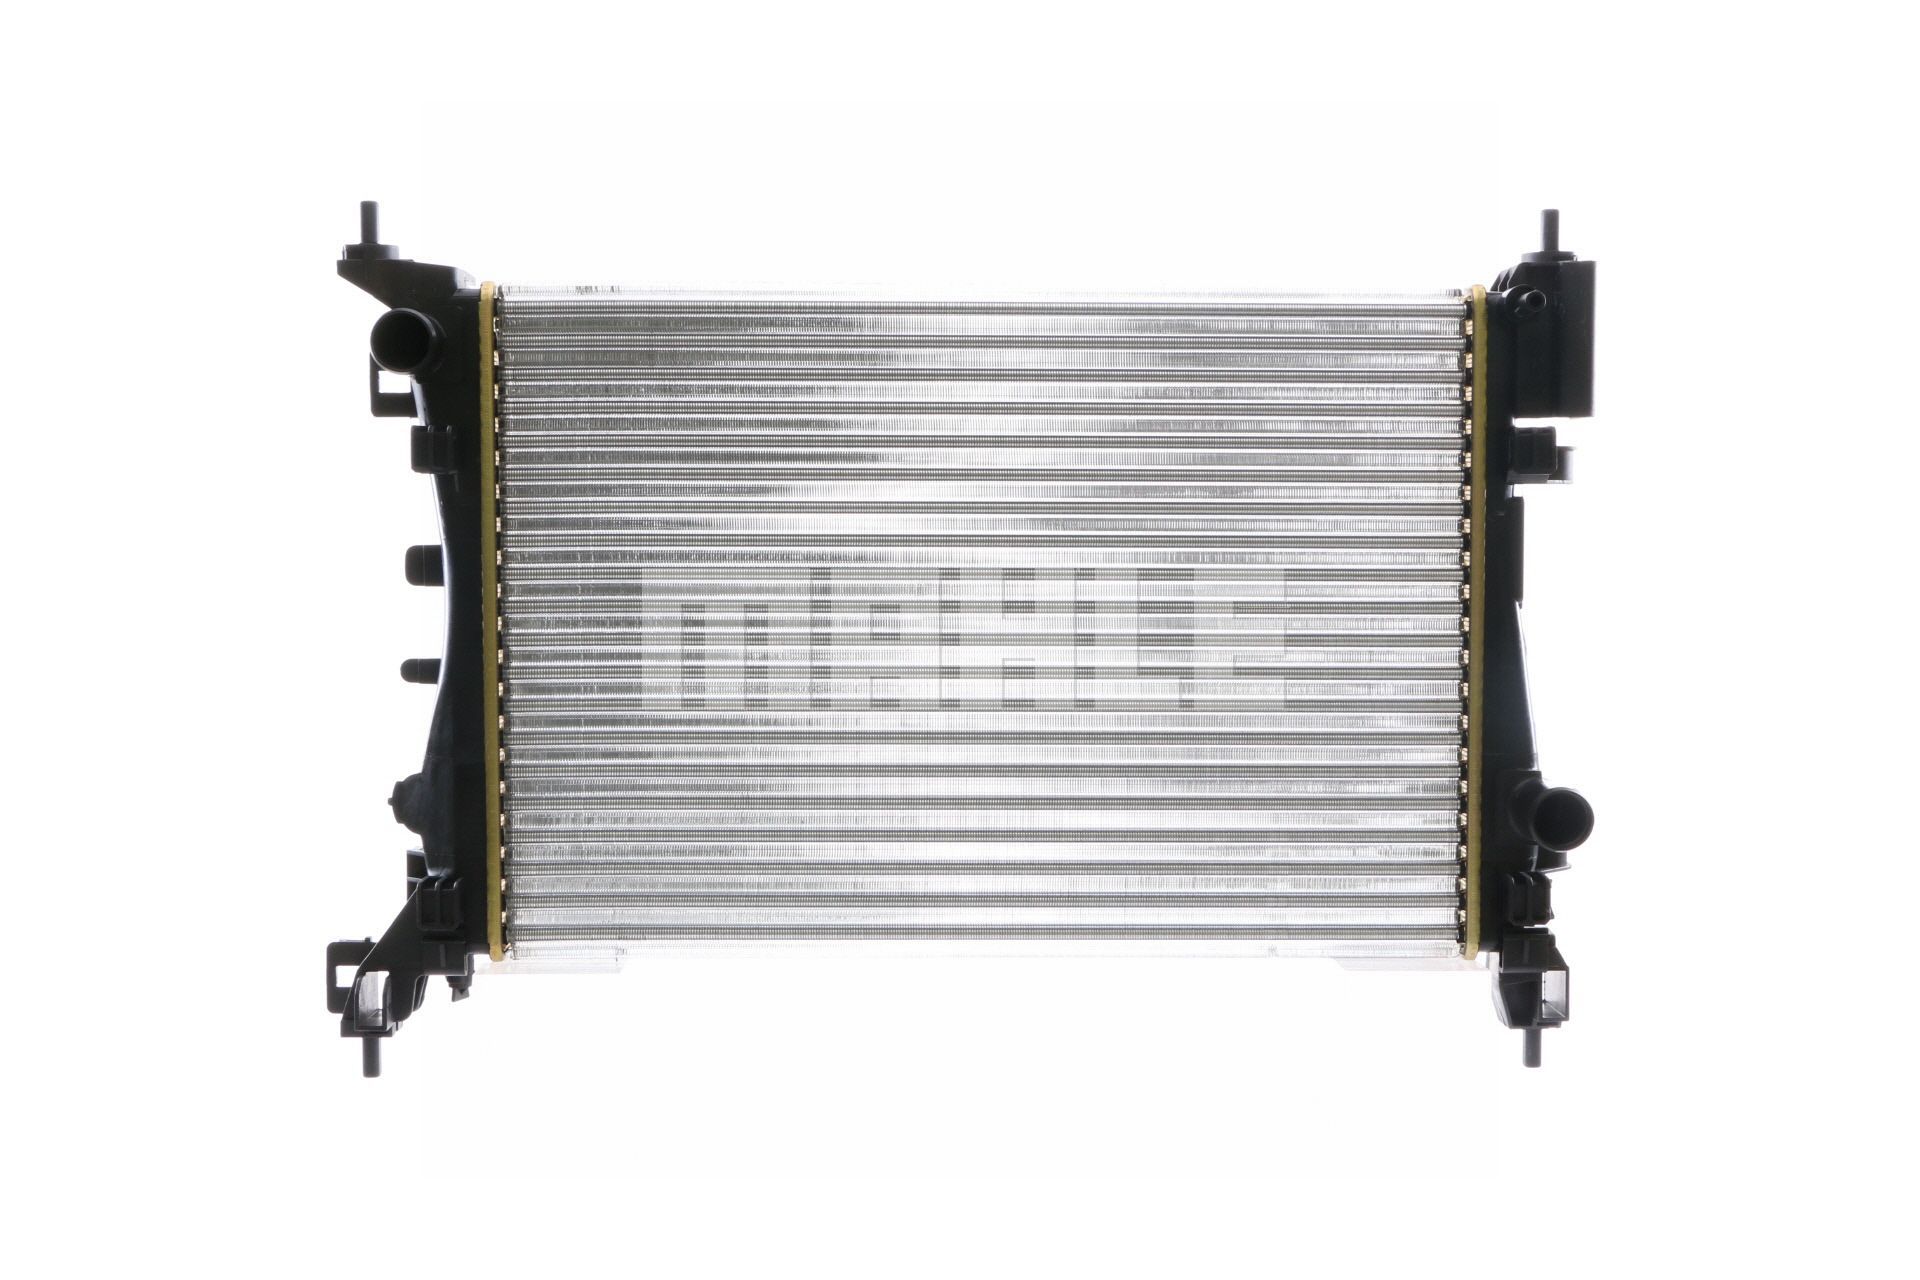 MAHLE ORIGINAL CR 773 000S Engine radiator for vehicles with/without air conditioning, 540 x 378 x 23 mm, with bolts/screws, Automatic Transmission, Manual Transmission, Mechanically jointed cooling fins